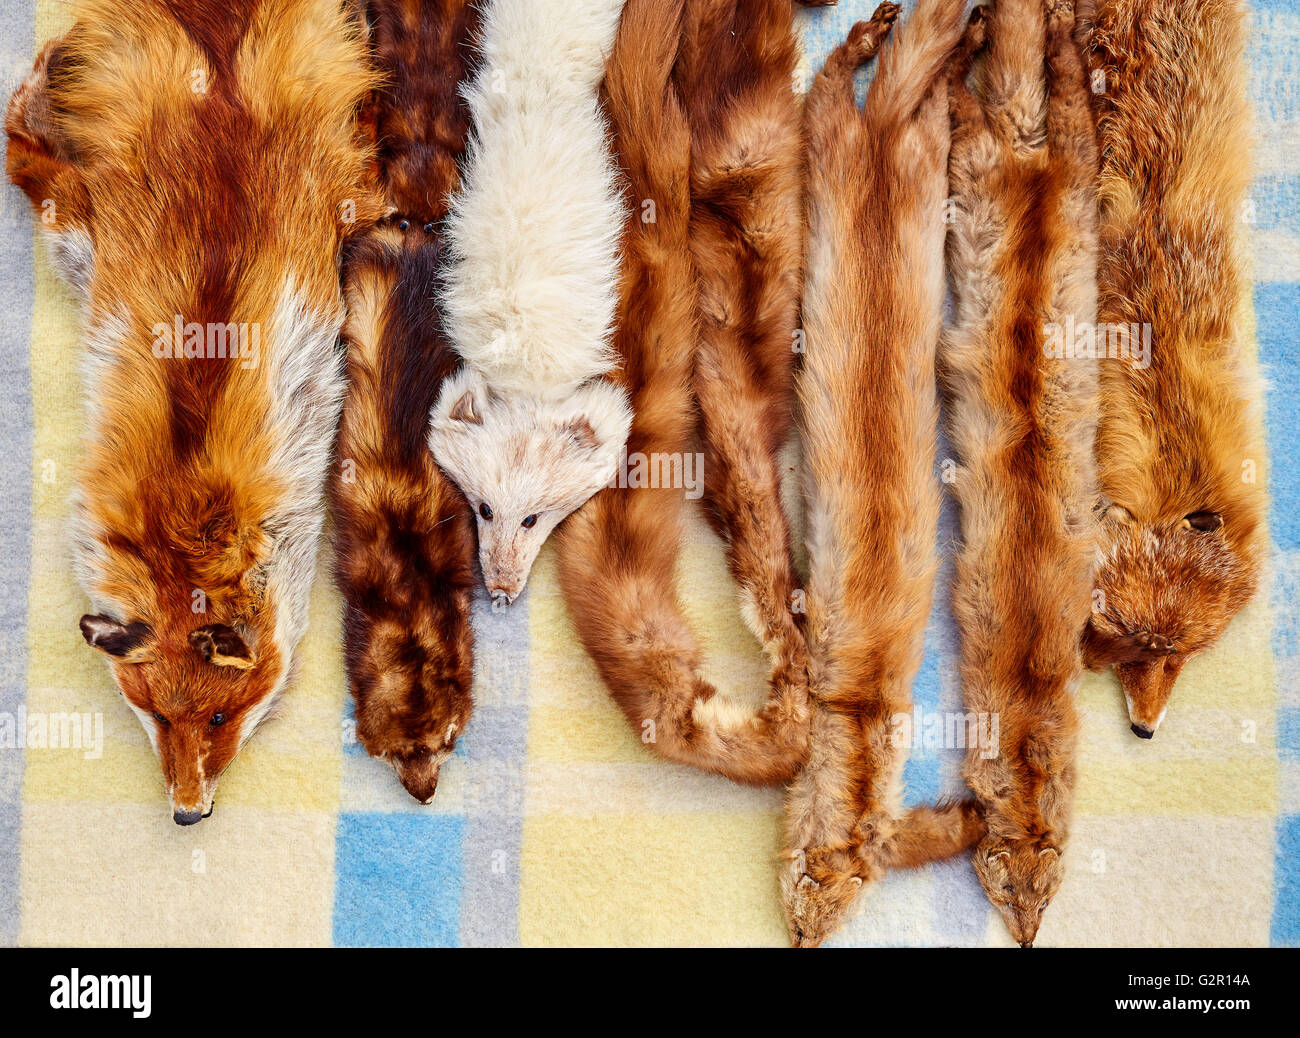 Fox animal real fur scarves at outdoor market in a row Stock Photo